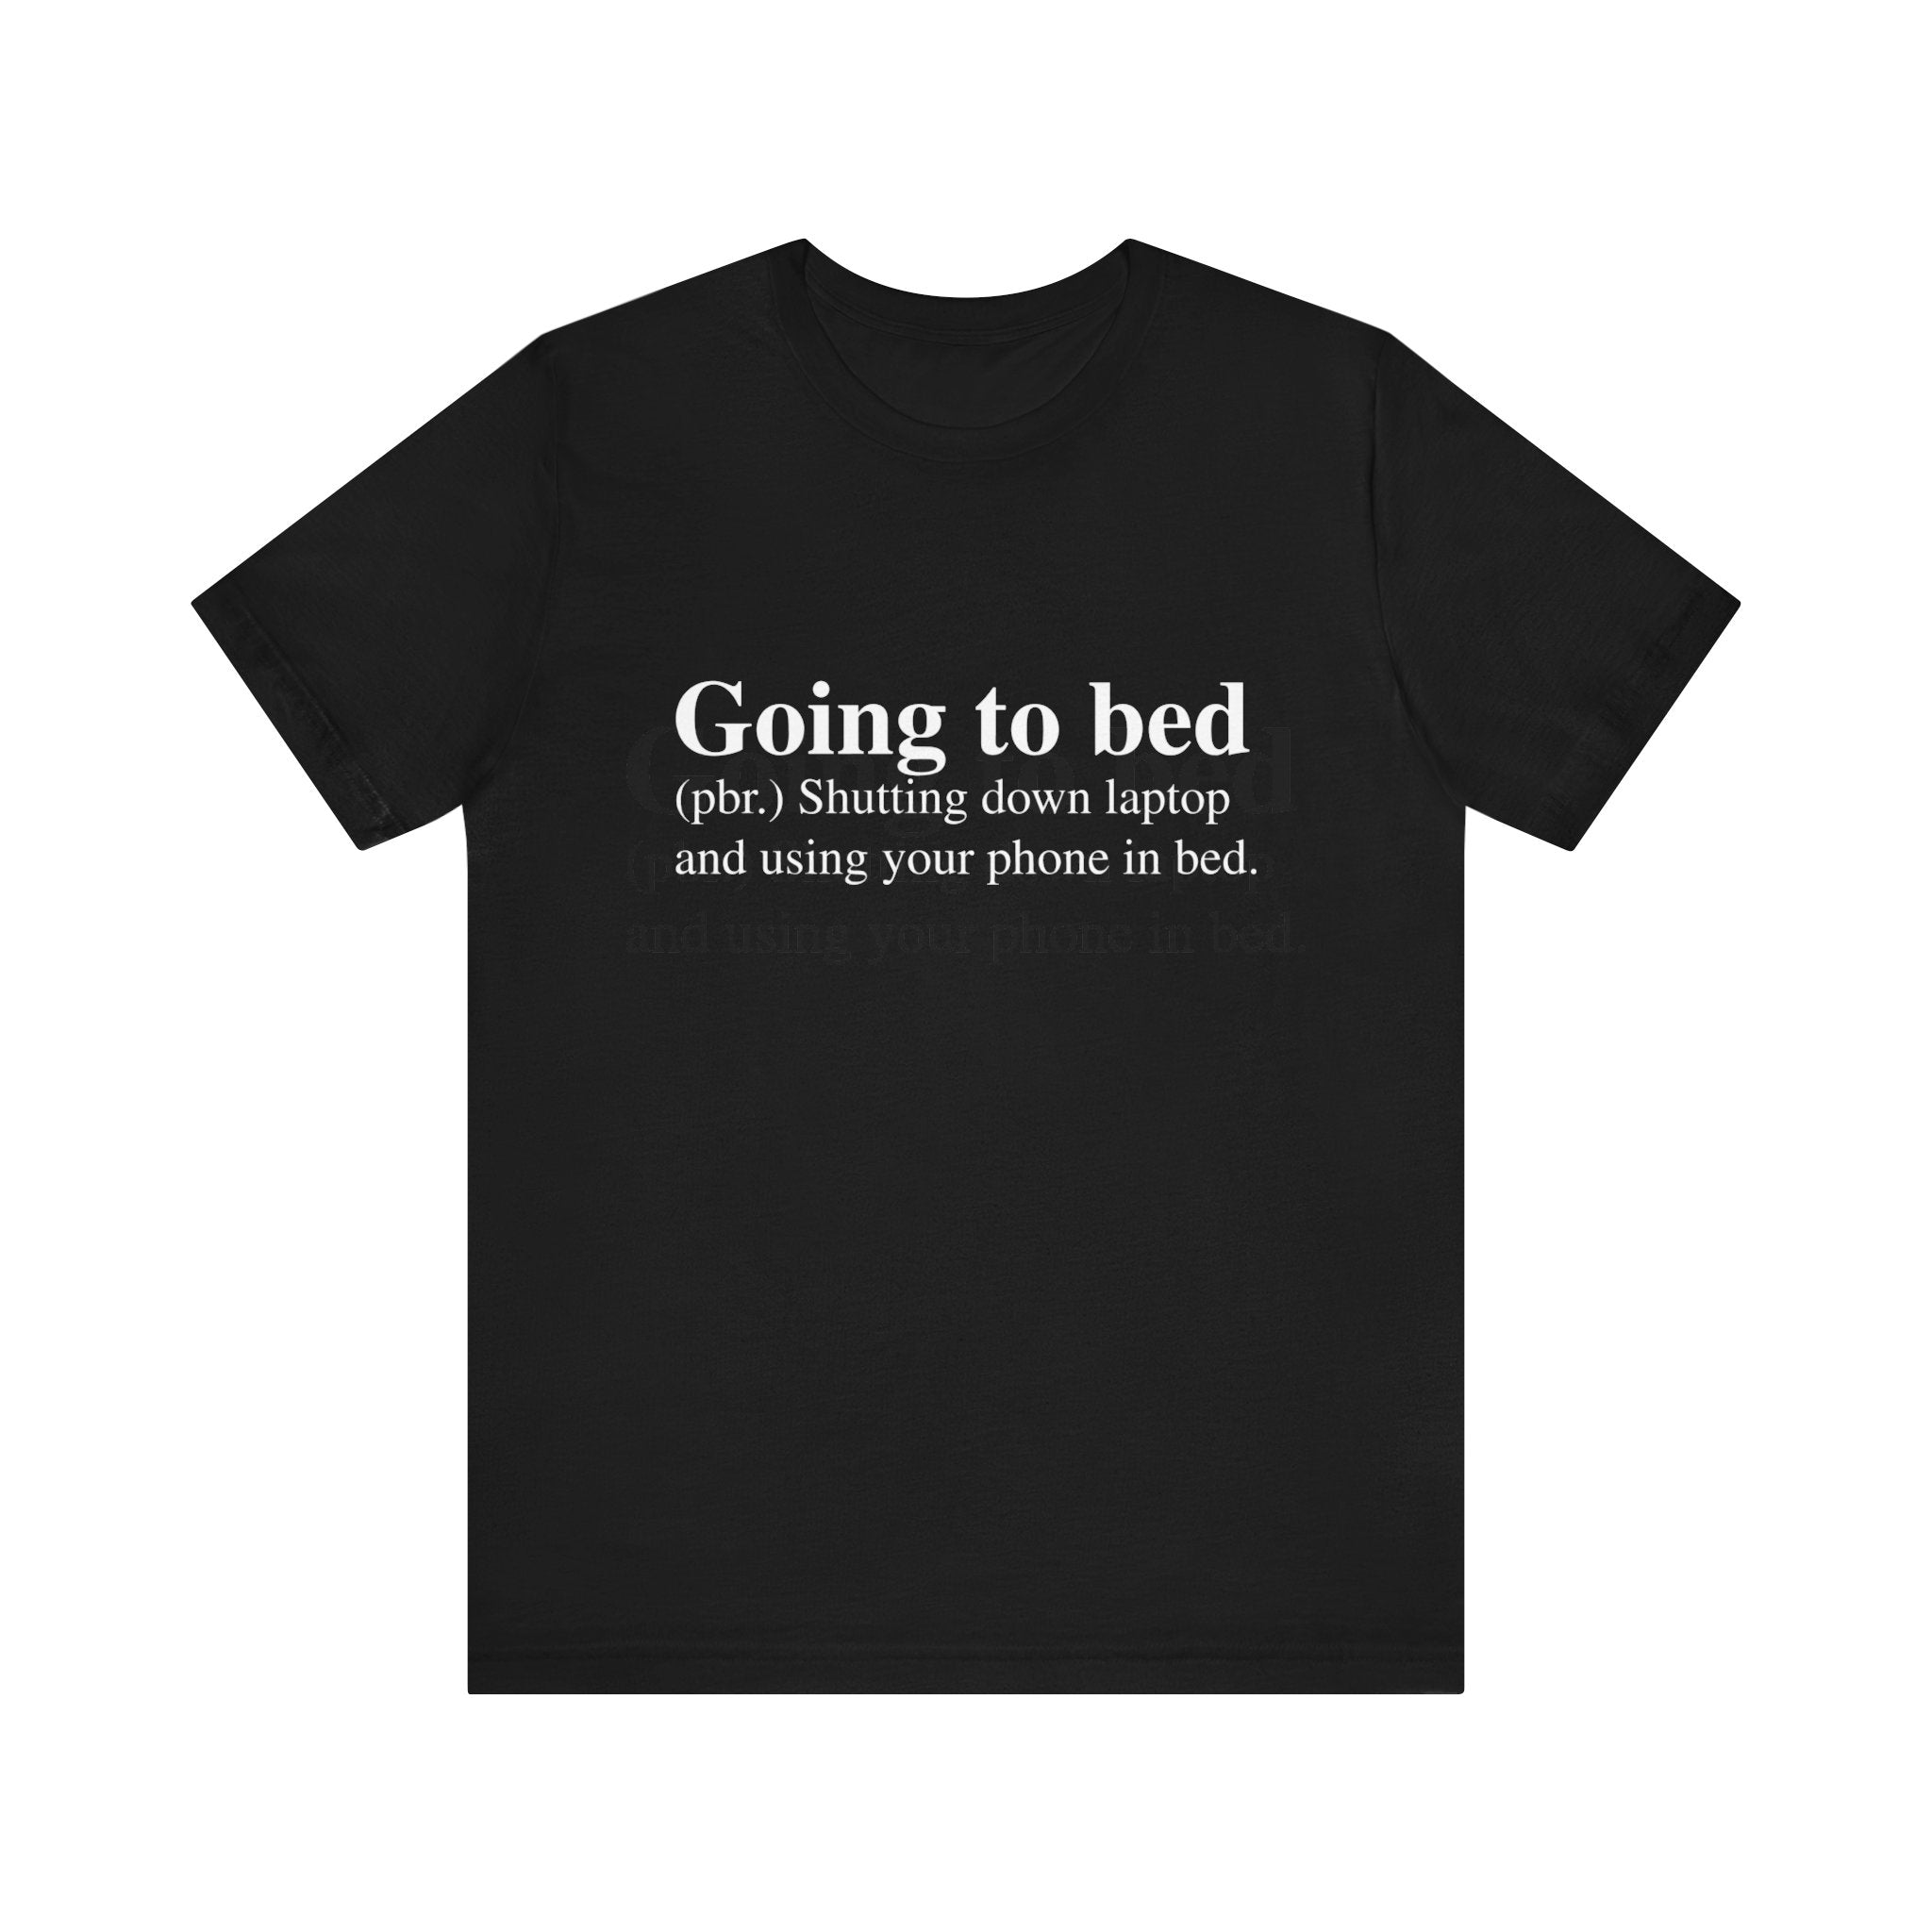 Black Going to Bed T-Shirt with white text defining "going to bed" as shutting down a laptop and using a phone in bed, crafted from soft cotton.